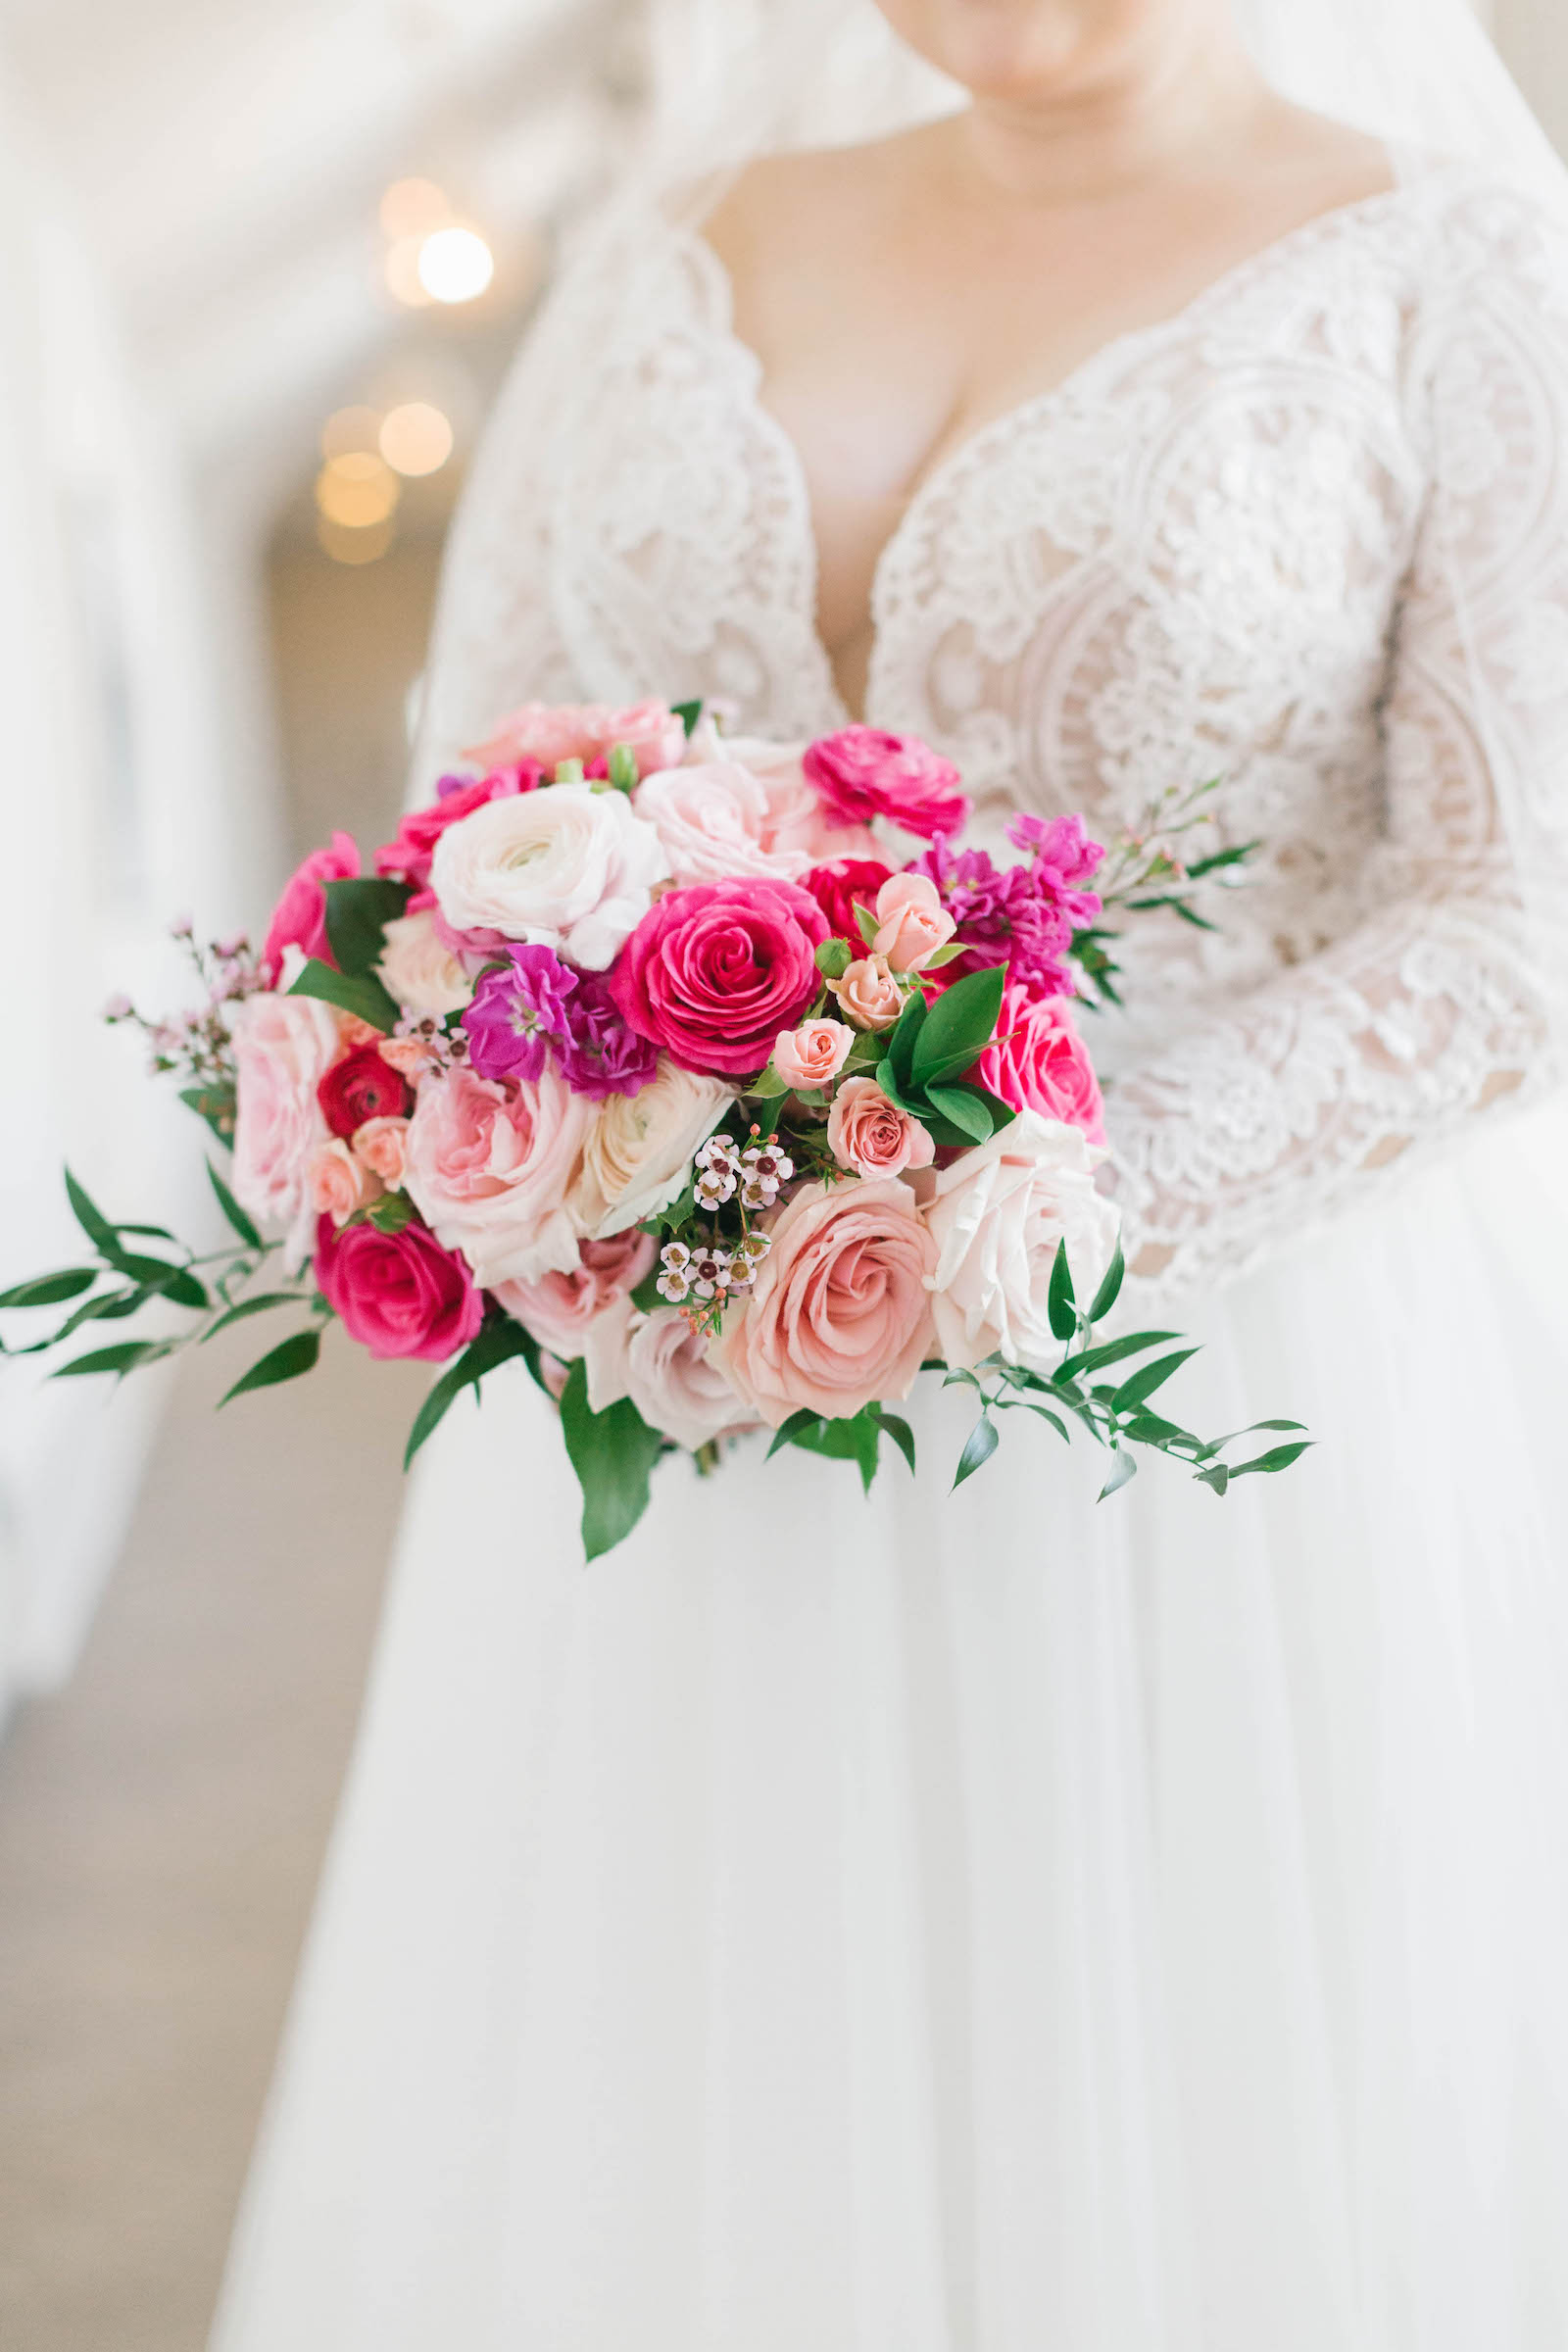 St. Pete Bride Wearing Lace and Illusion Wedding Dress Holding Vibrant Pink Roses, Purple and White Floral Bouquet | Tampa Bay Wedding Florist Bruce Wayne Florals